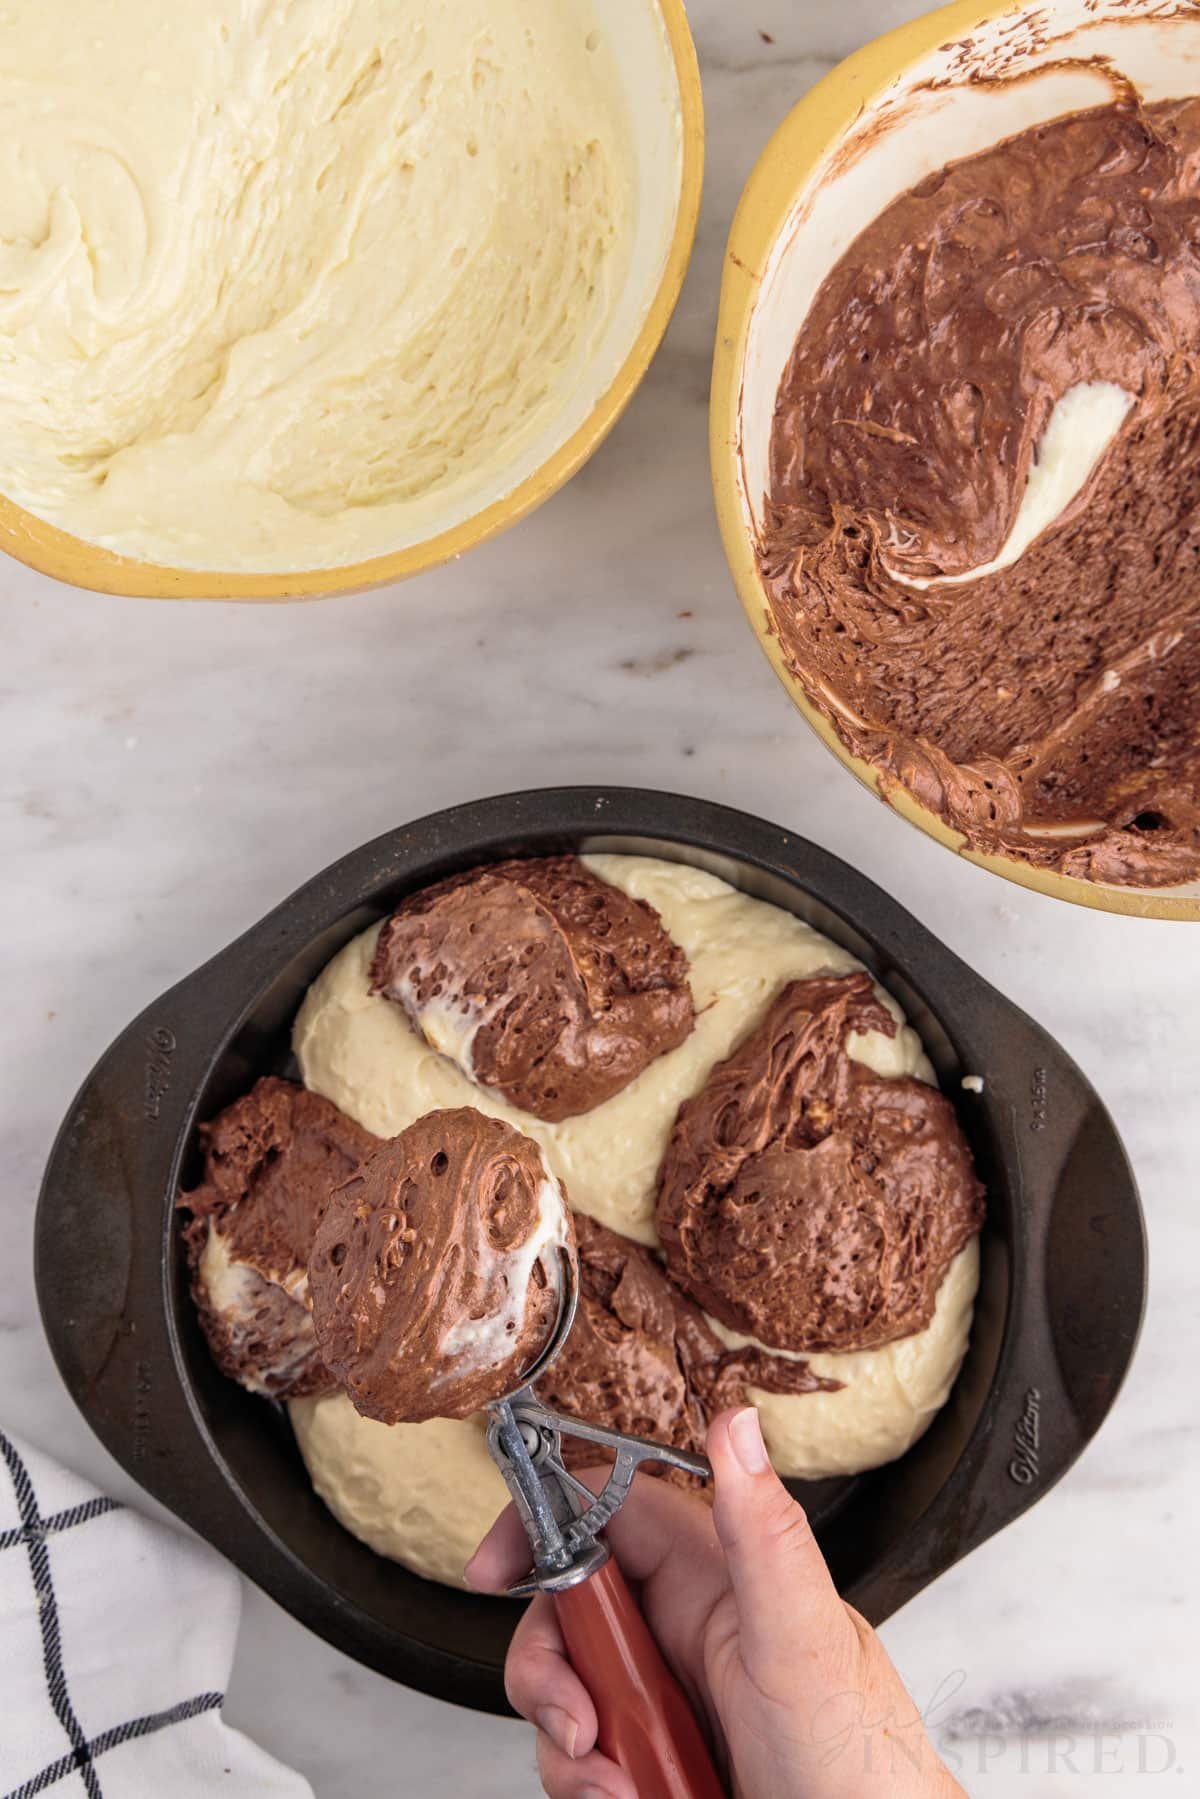 Bowl of vanilla cake batter, bowl of chocolate cake batter, prepared cake pan with hand over dropping scoops of chocolate cake mix into the pan, checkered linen, on a marble countertop.